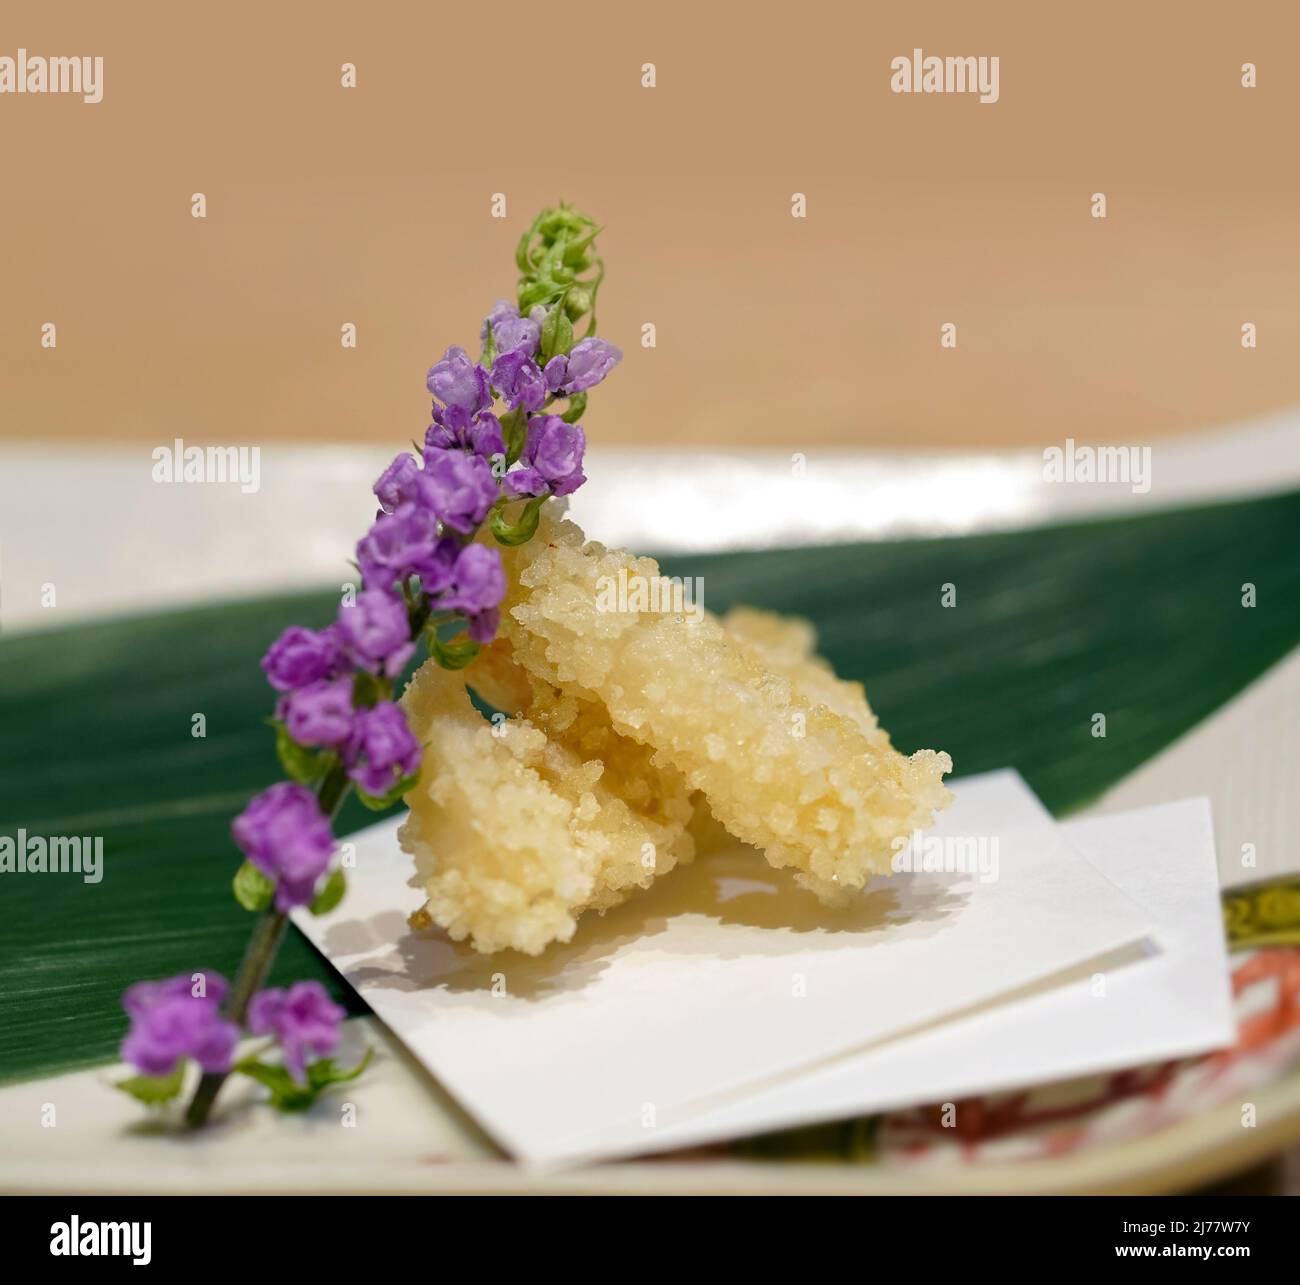 https://c8.alamy.com/comp/2J77W7Y/fish-tempura-served-on-ceramic-plate-decorated-with-little-turtle-flower-and-bamboo-leaves-appetizer-omakase-menu-at-japanese-sushi-restaurant-2J77W7Y.jpg